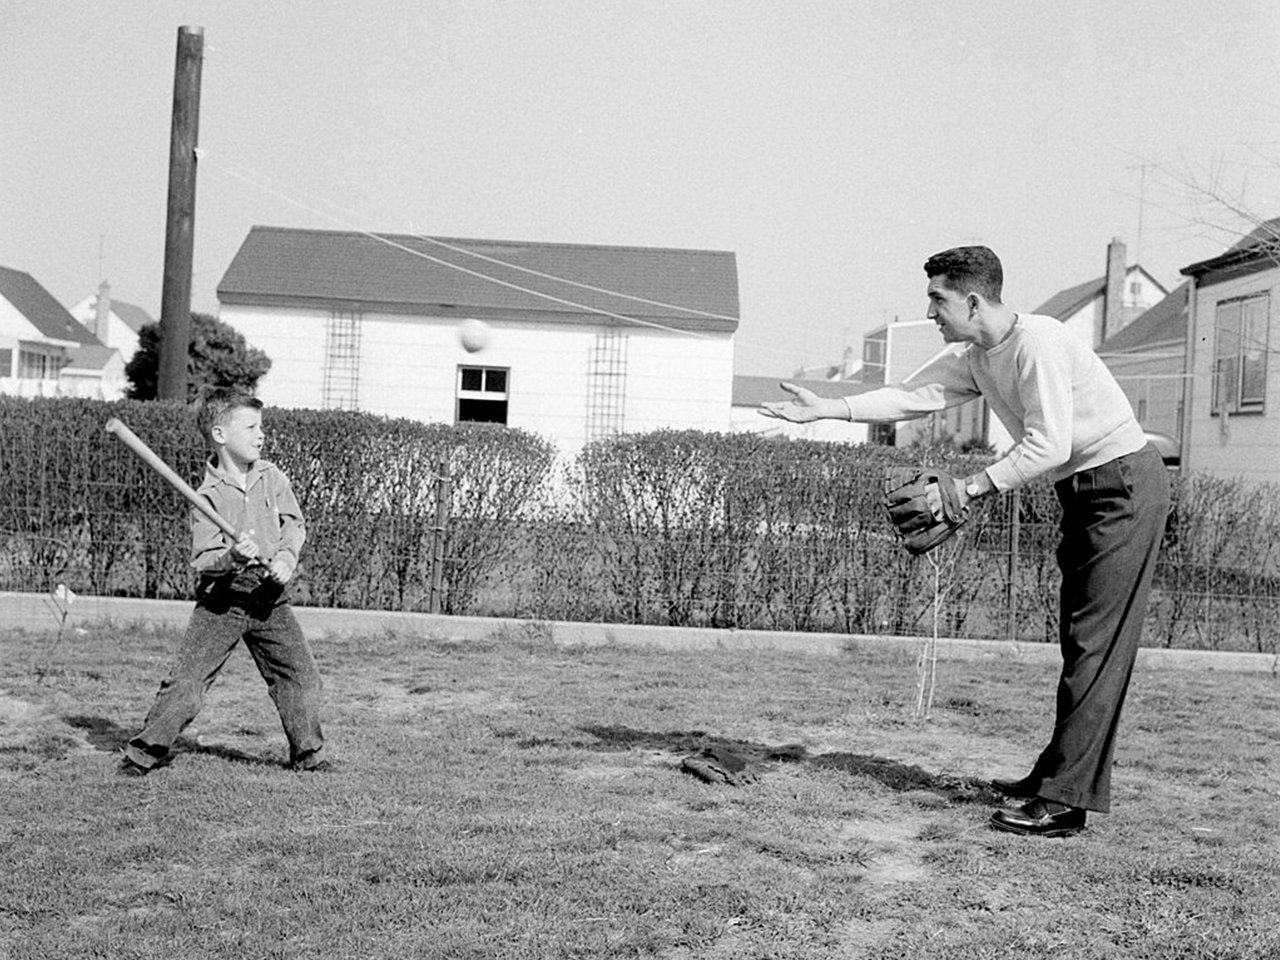 Vintage photo of dad and son playing catch